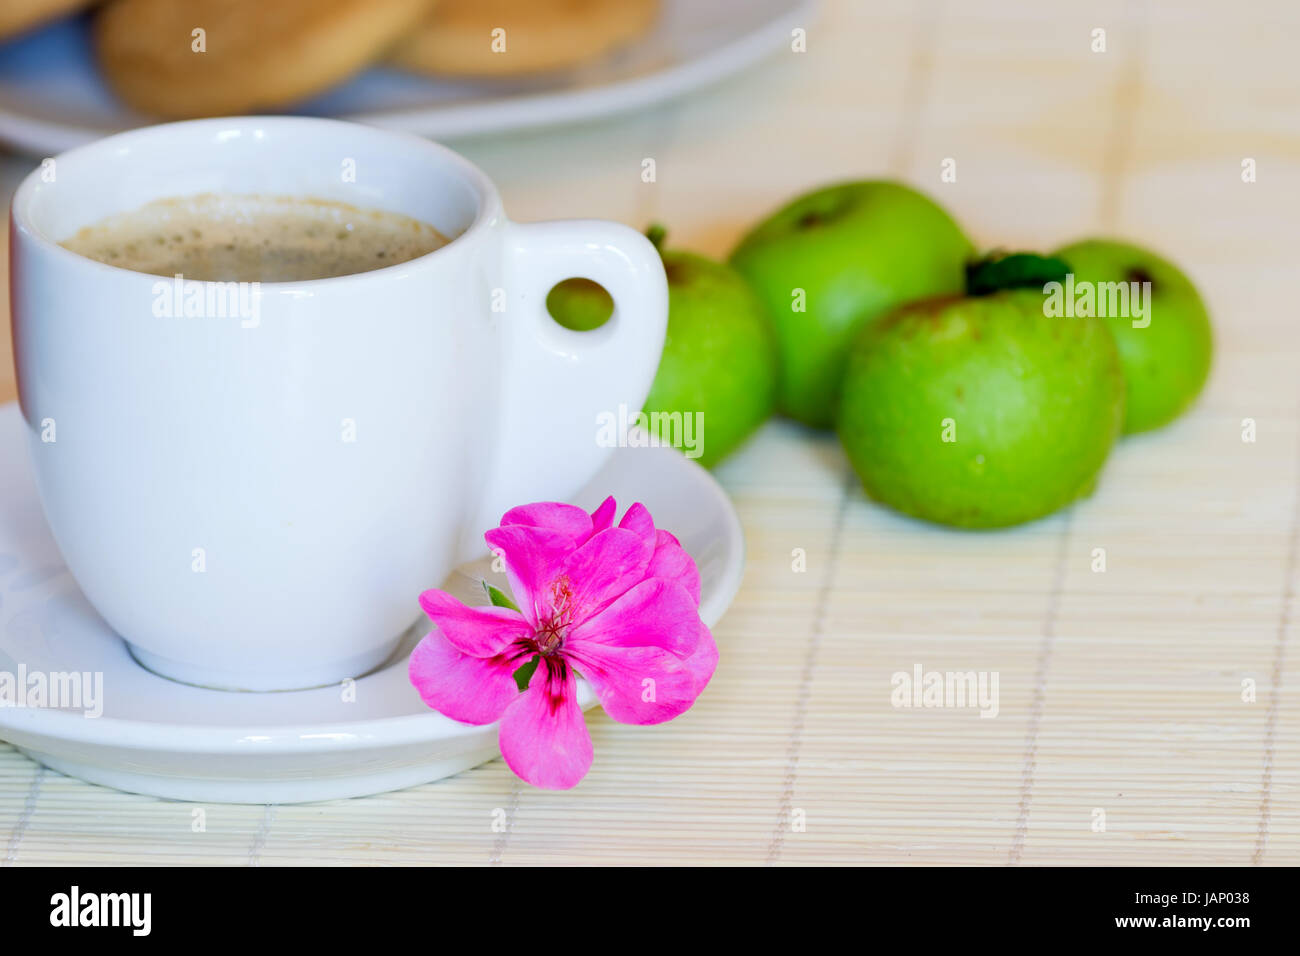 breakfast set with coffee, apple, cookies and a decorative flower Stock Photo